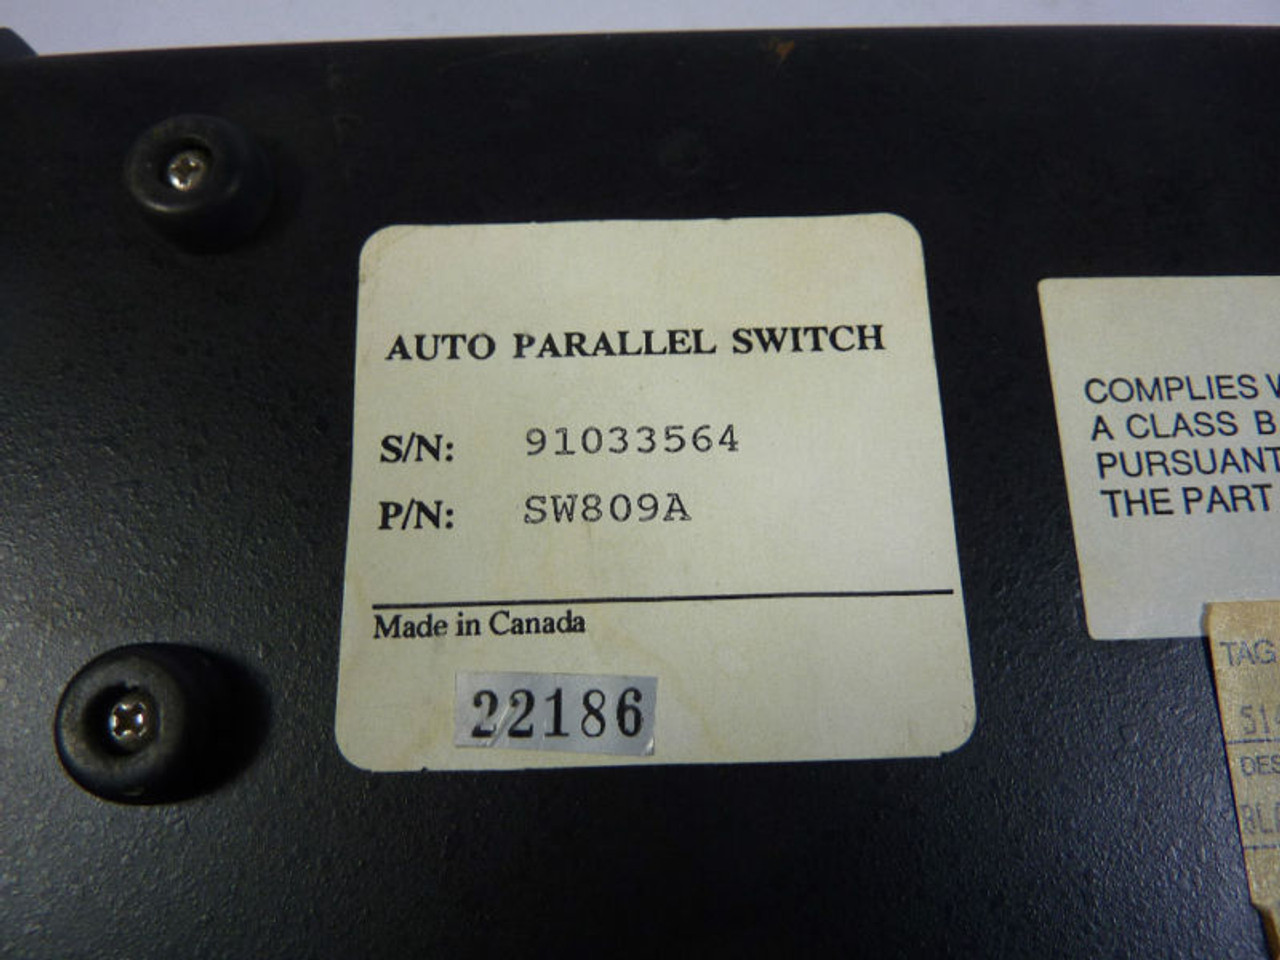 Eazy SW809A Auto Parallel Switch USED